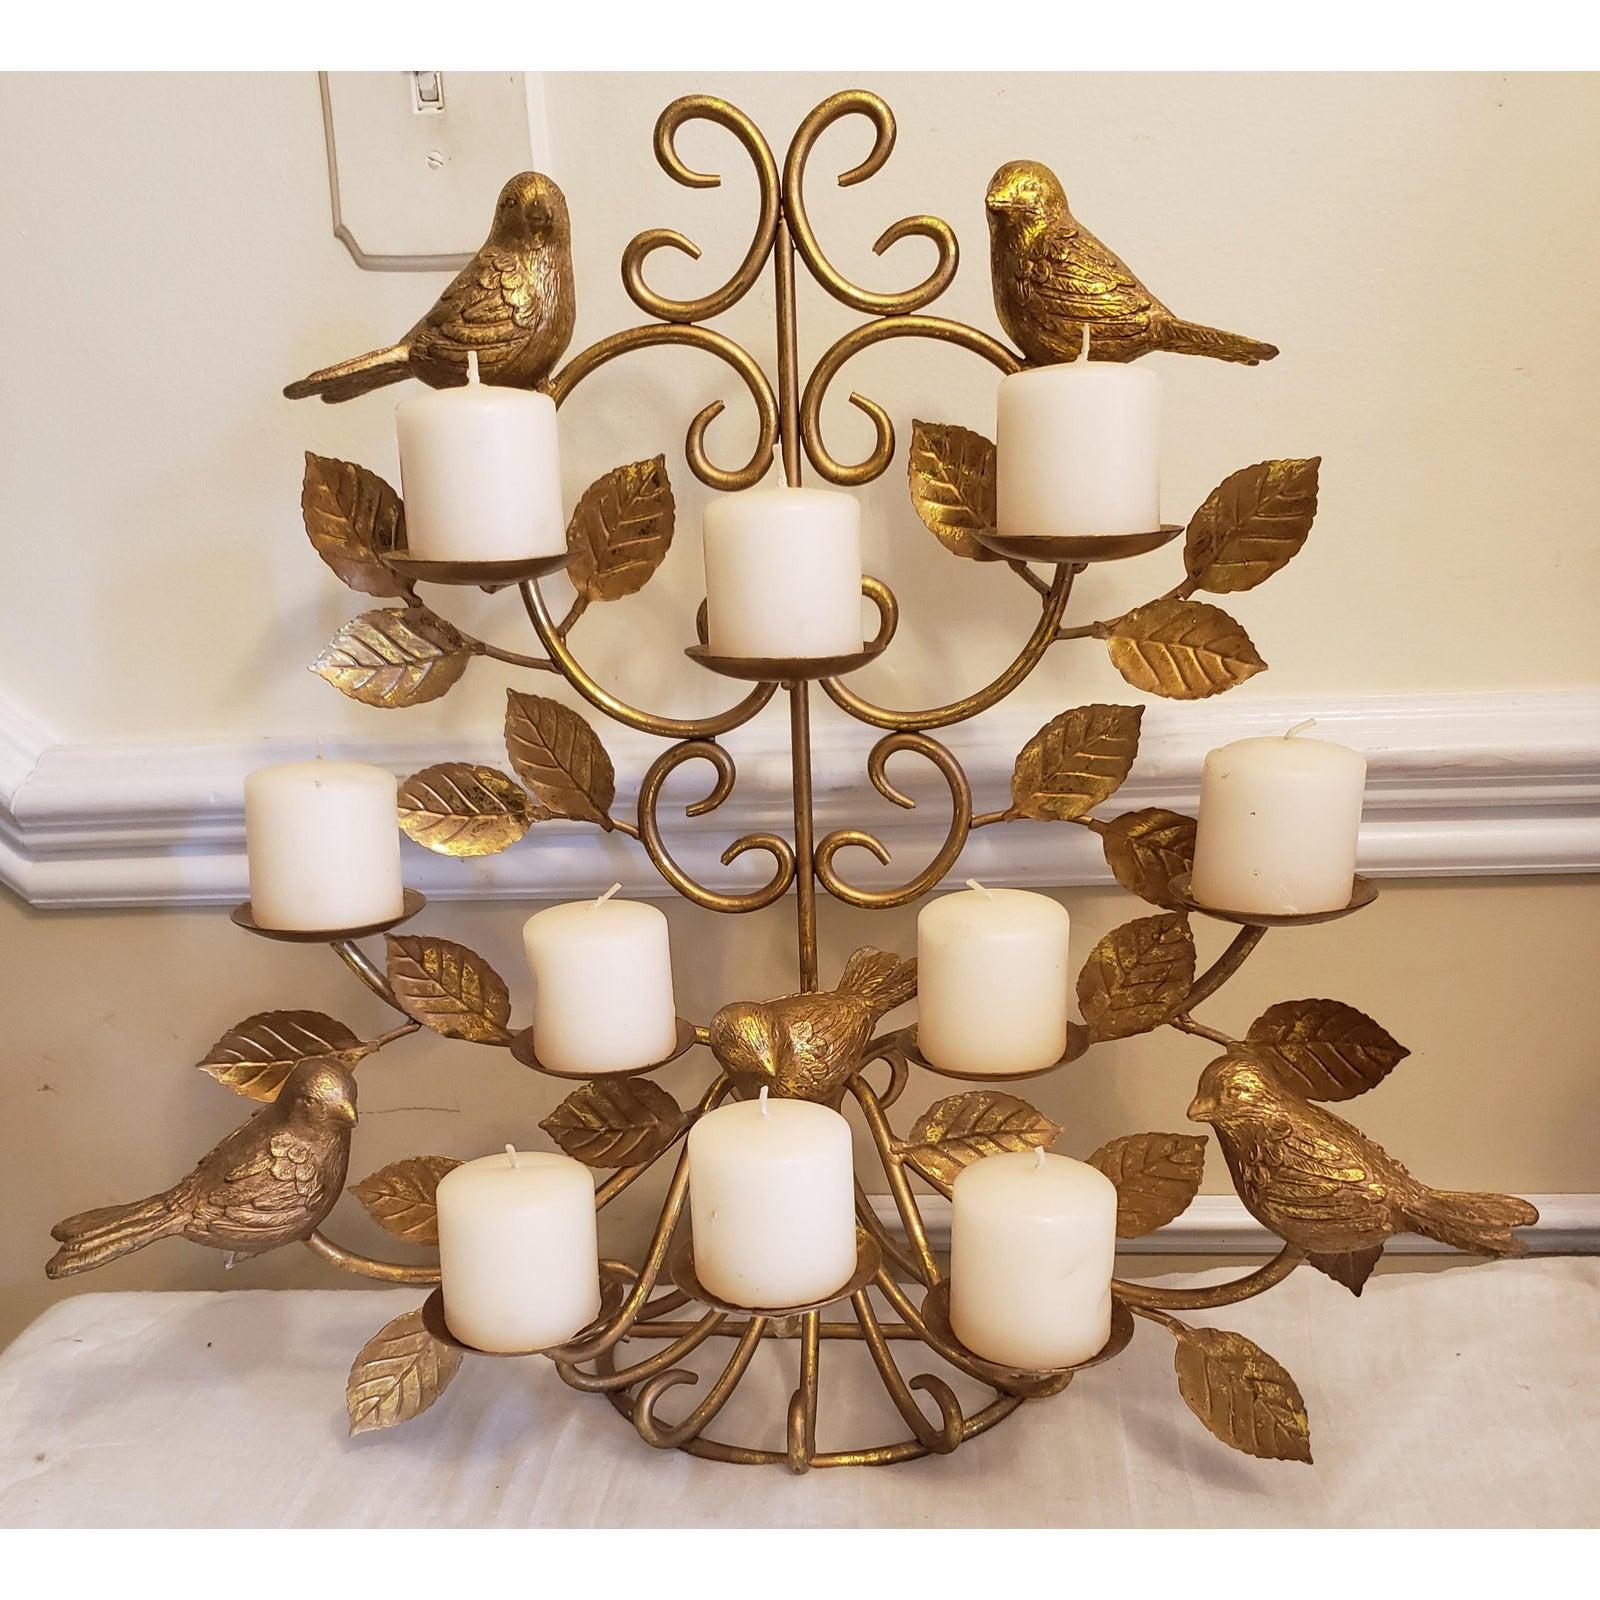 Large Vintage bird candelabra ornate wall candleholder or free standing holds 10 candles wedding home decor wall sconces. Comes with 10 new candles.
Vintage ornate candleholder features 5 beautiful birds with detailed feathers and holds 10 pillar